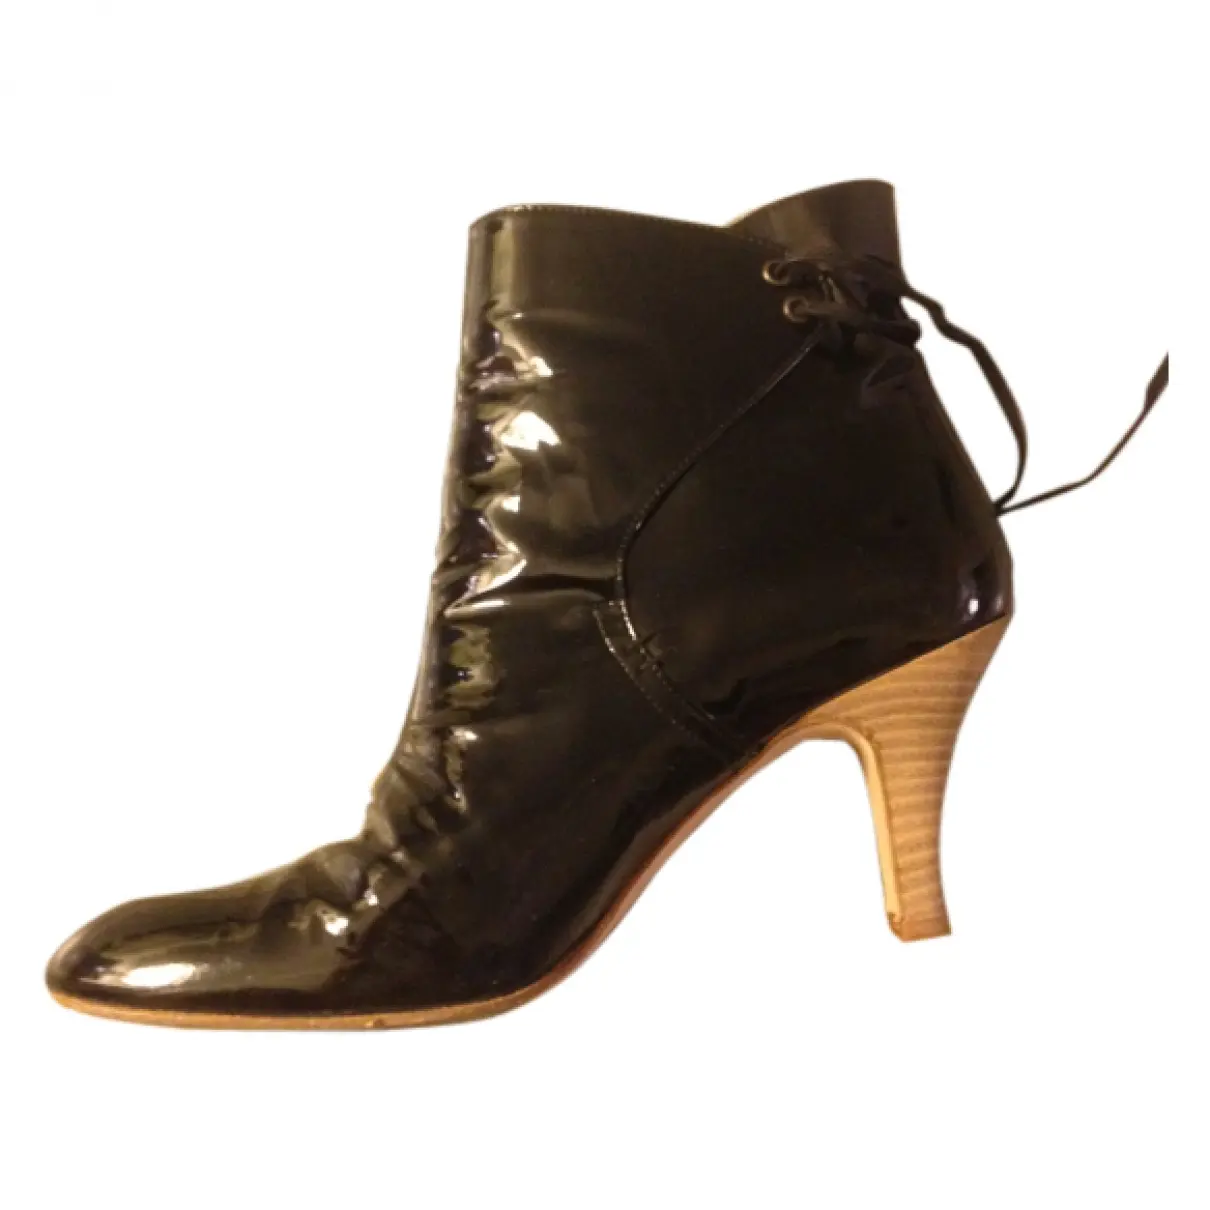 Buy Vanessa Bruno Patent leather ankle boots online